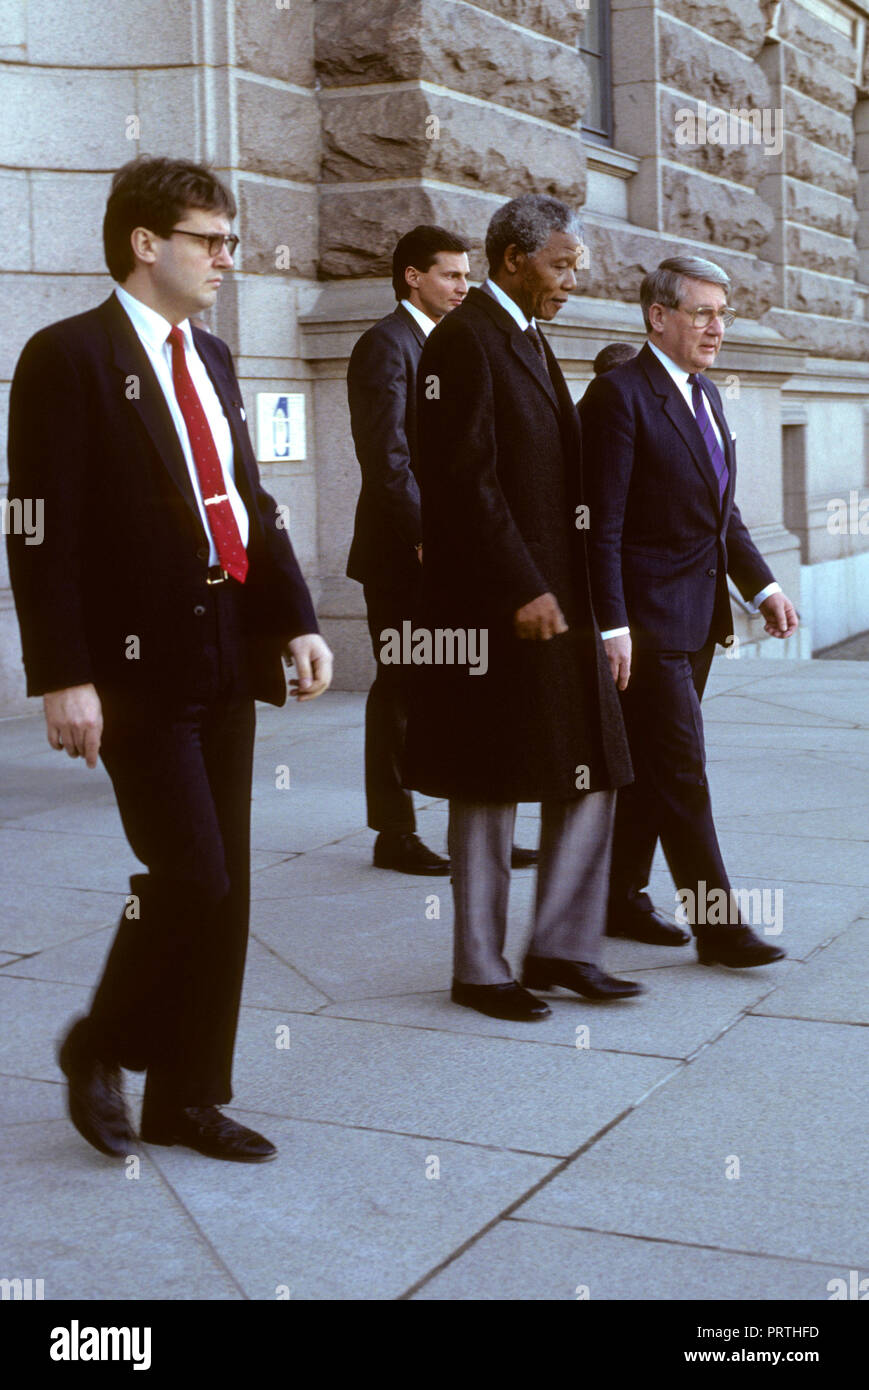 NELSON MANDELA ANC and South Africa leader in Stockholm for meeting with Swedish speaker Thage G Pettersson 1990 Stock Photo